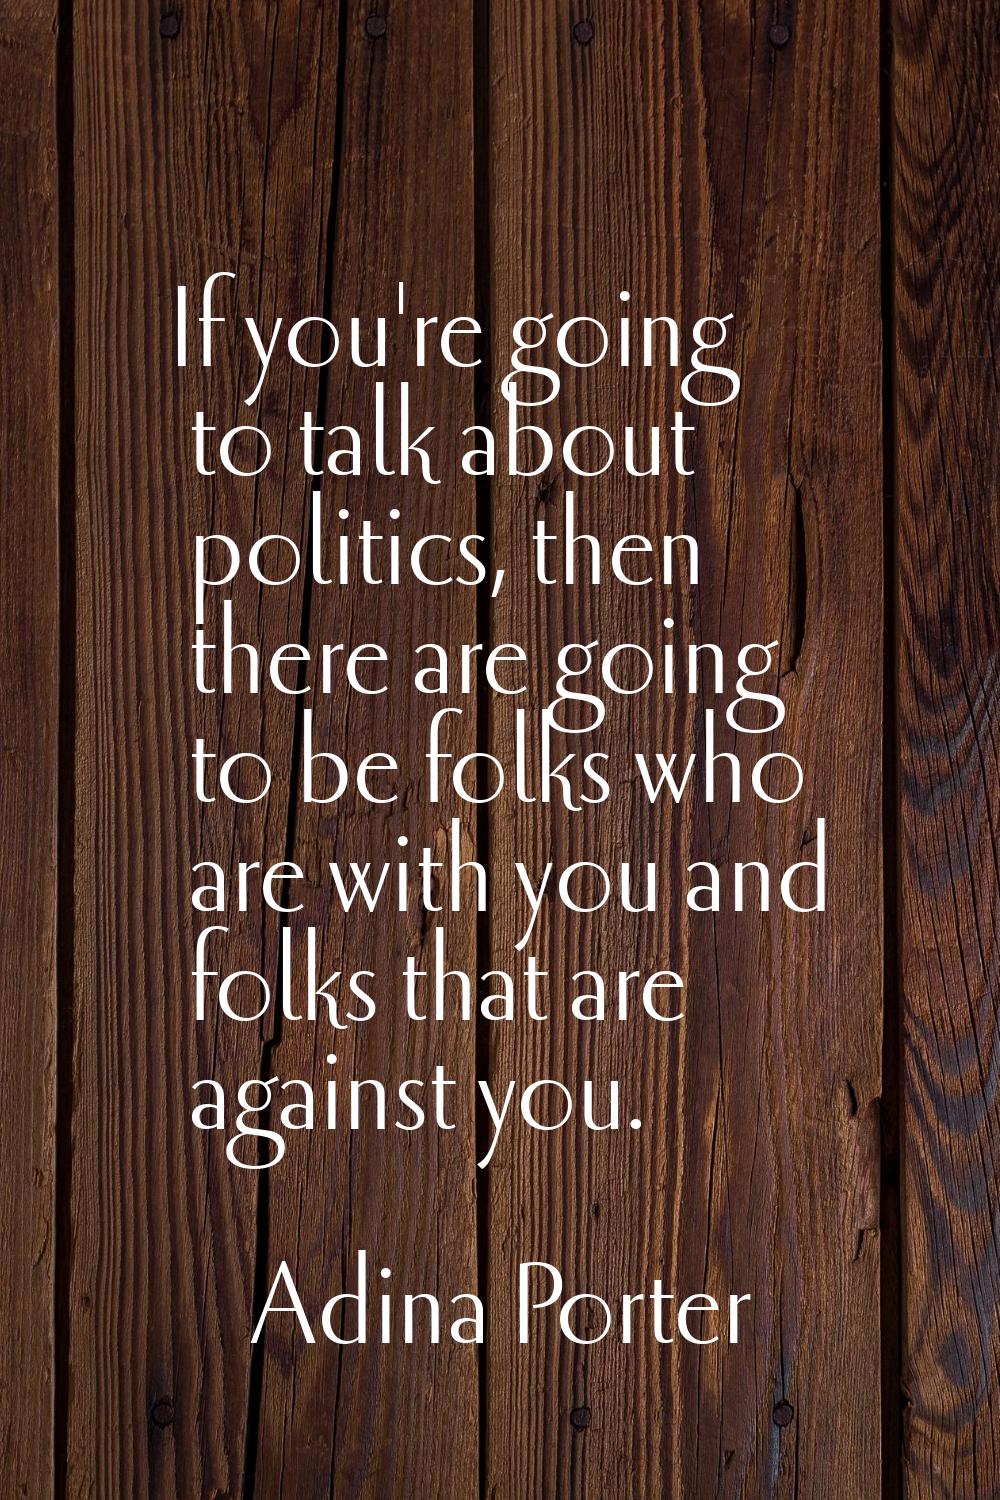 If you're going to talk about politics, then there are going to be folks who are with you and folks